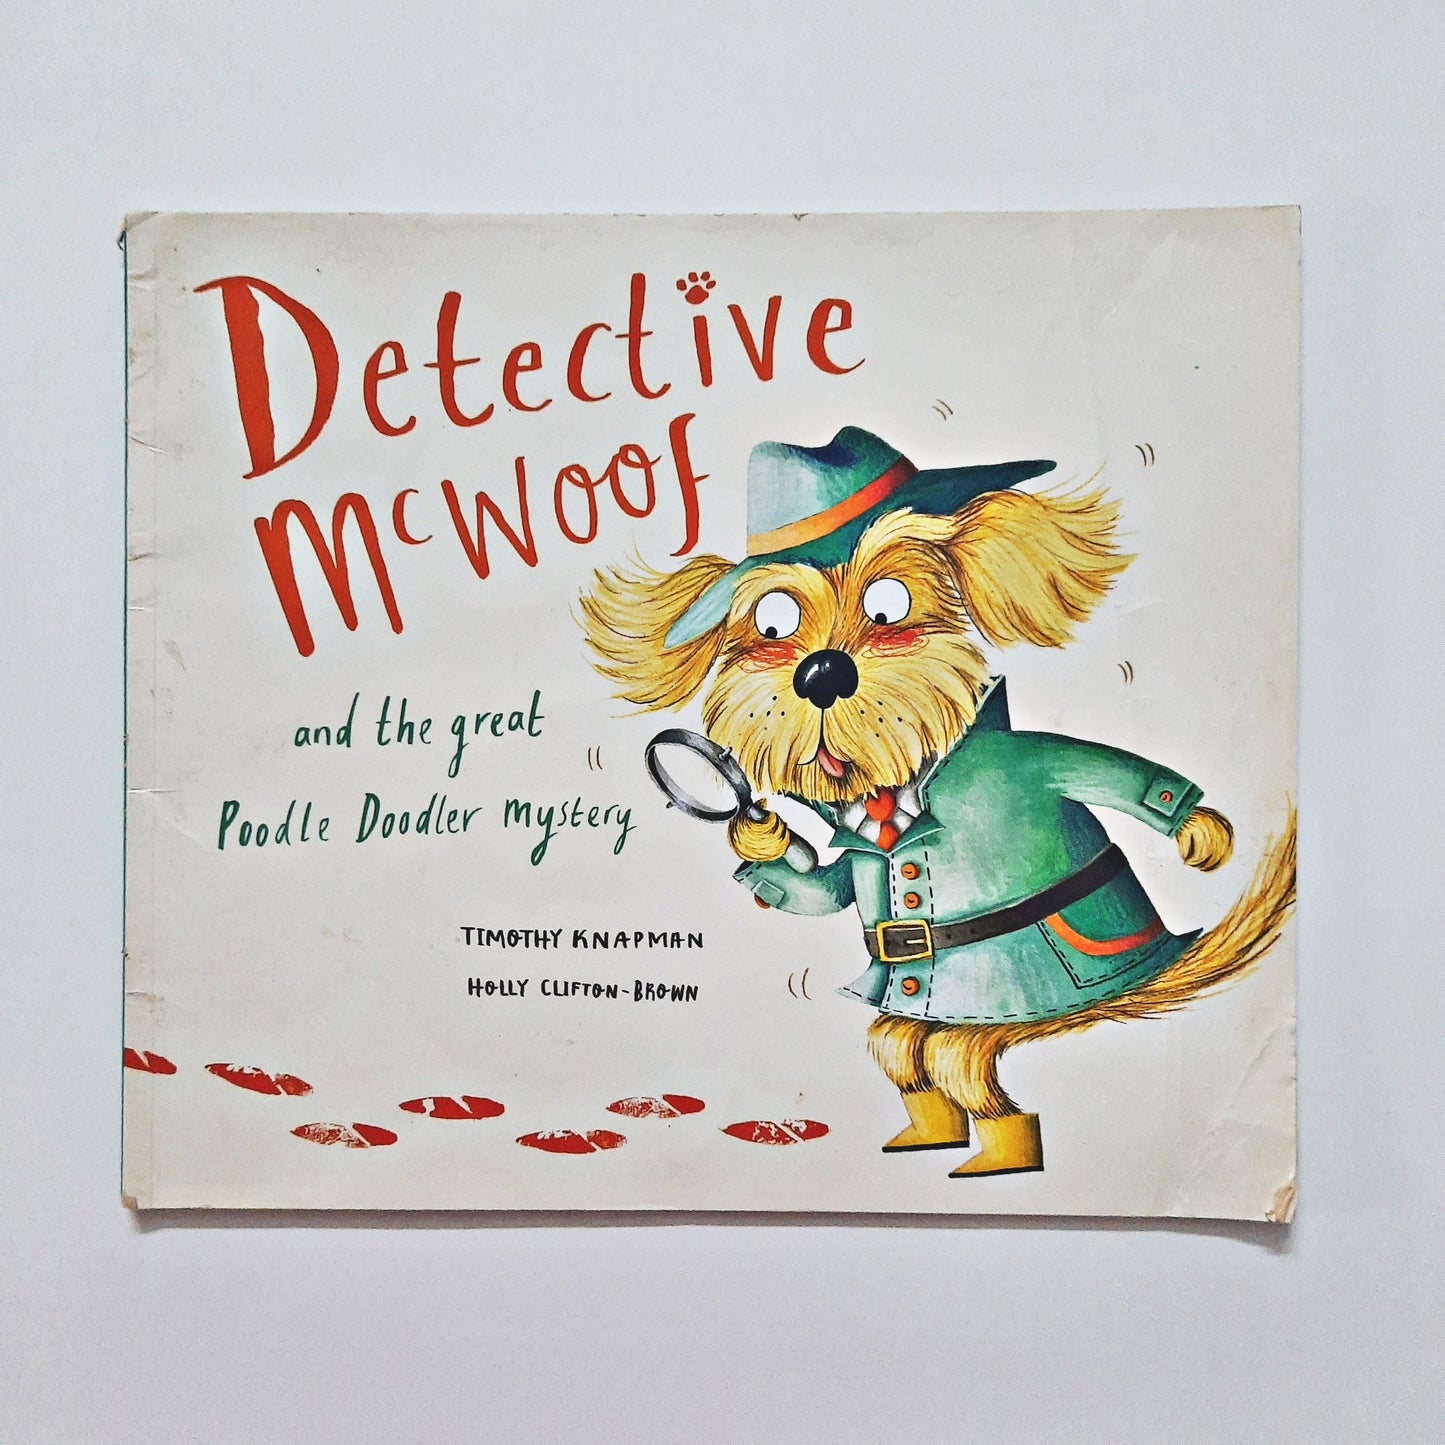 Detective Mcwoof and the great Poodle Doodler Mystery